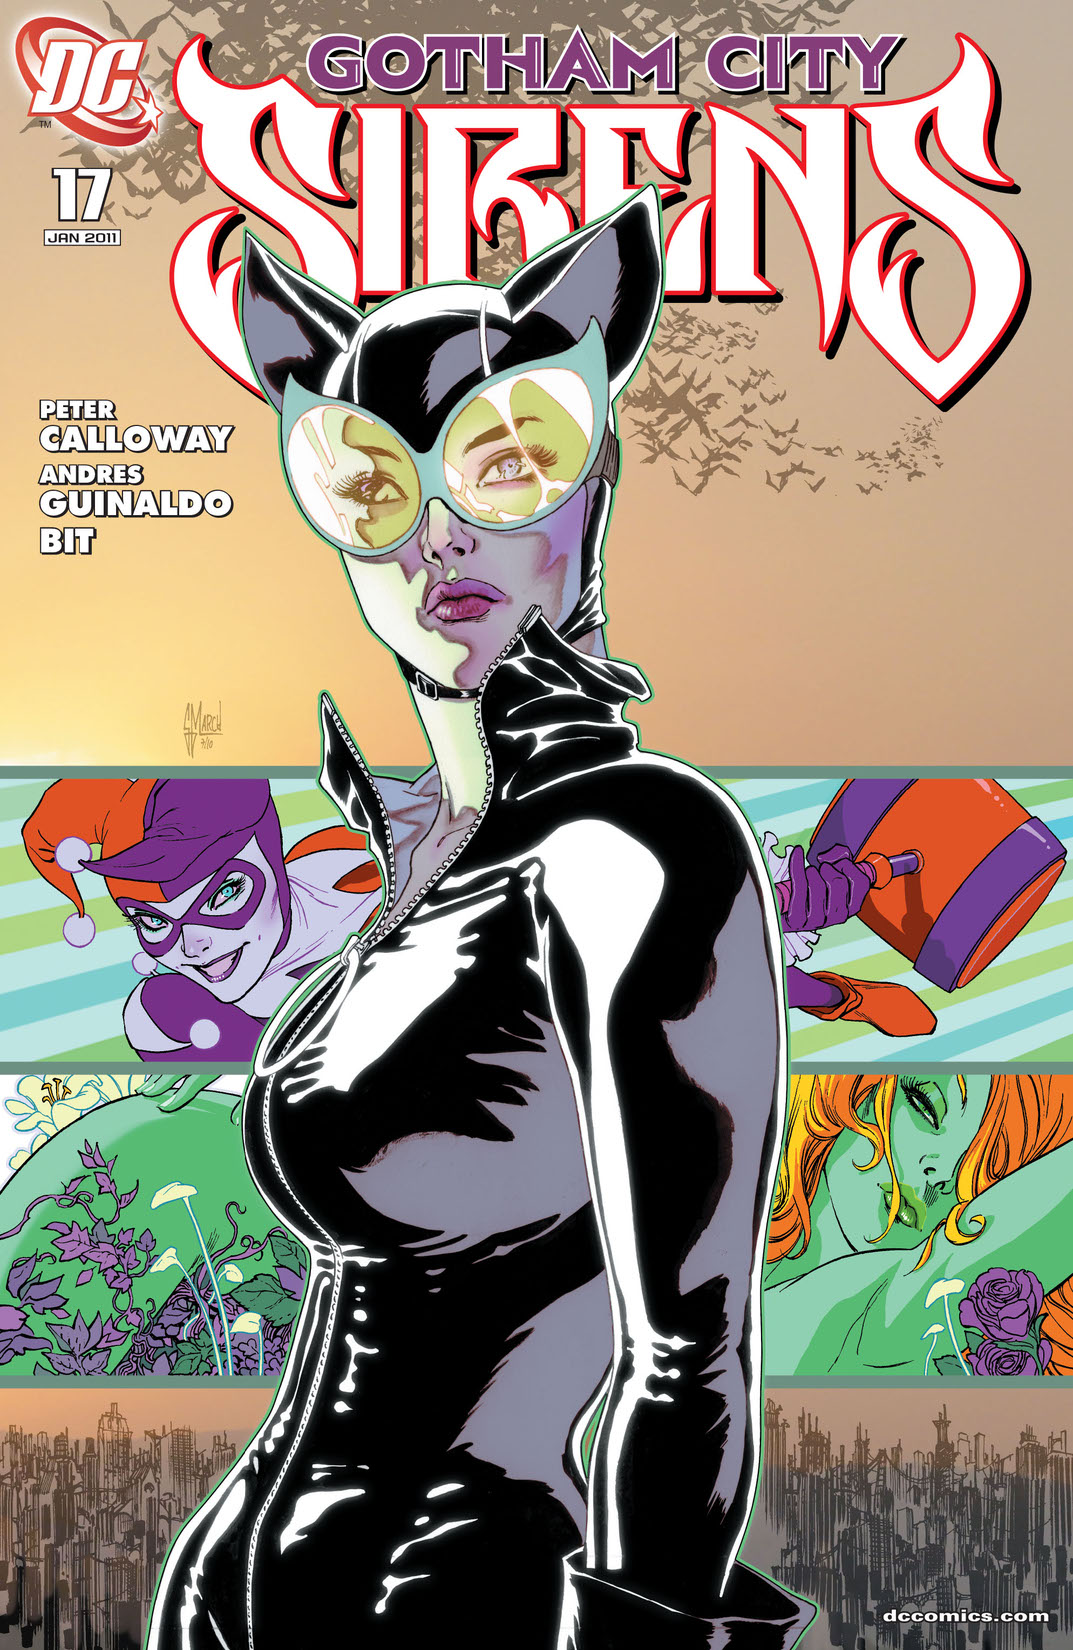 Gotham City Sirens #17 preview images